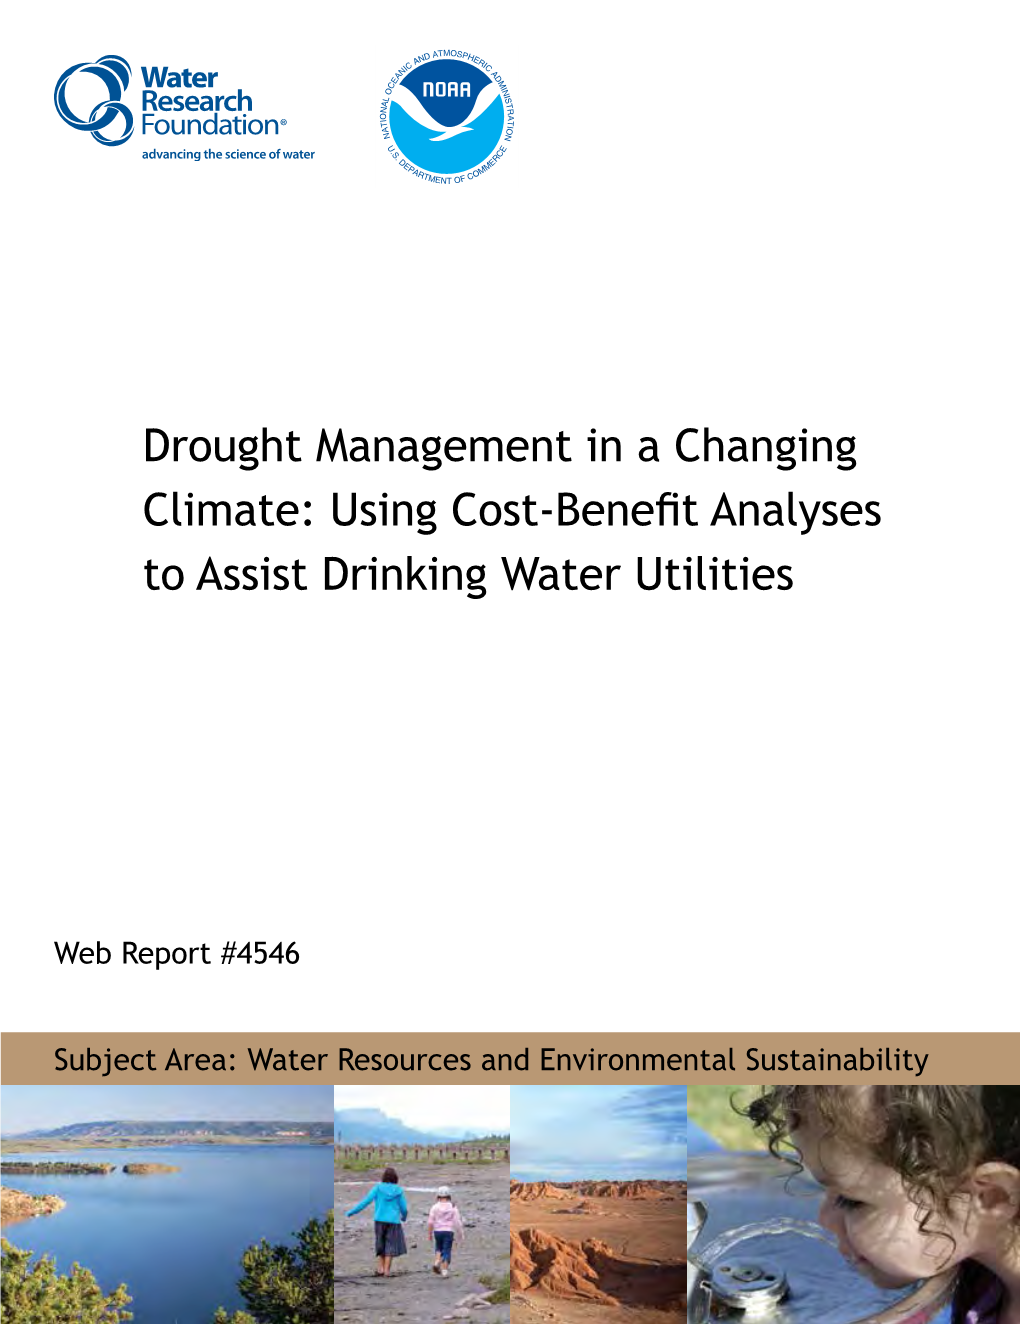 Drought Management in a Changing Climate: Using Cost-Benefit Analyses to Assist Drinking Water Utilities